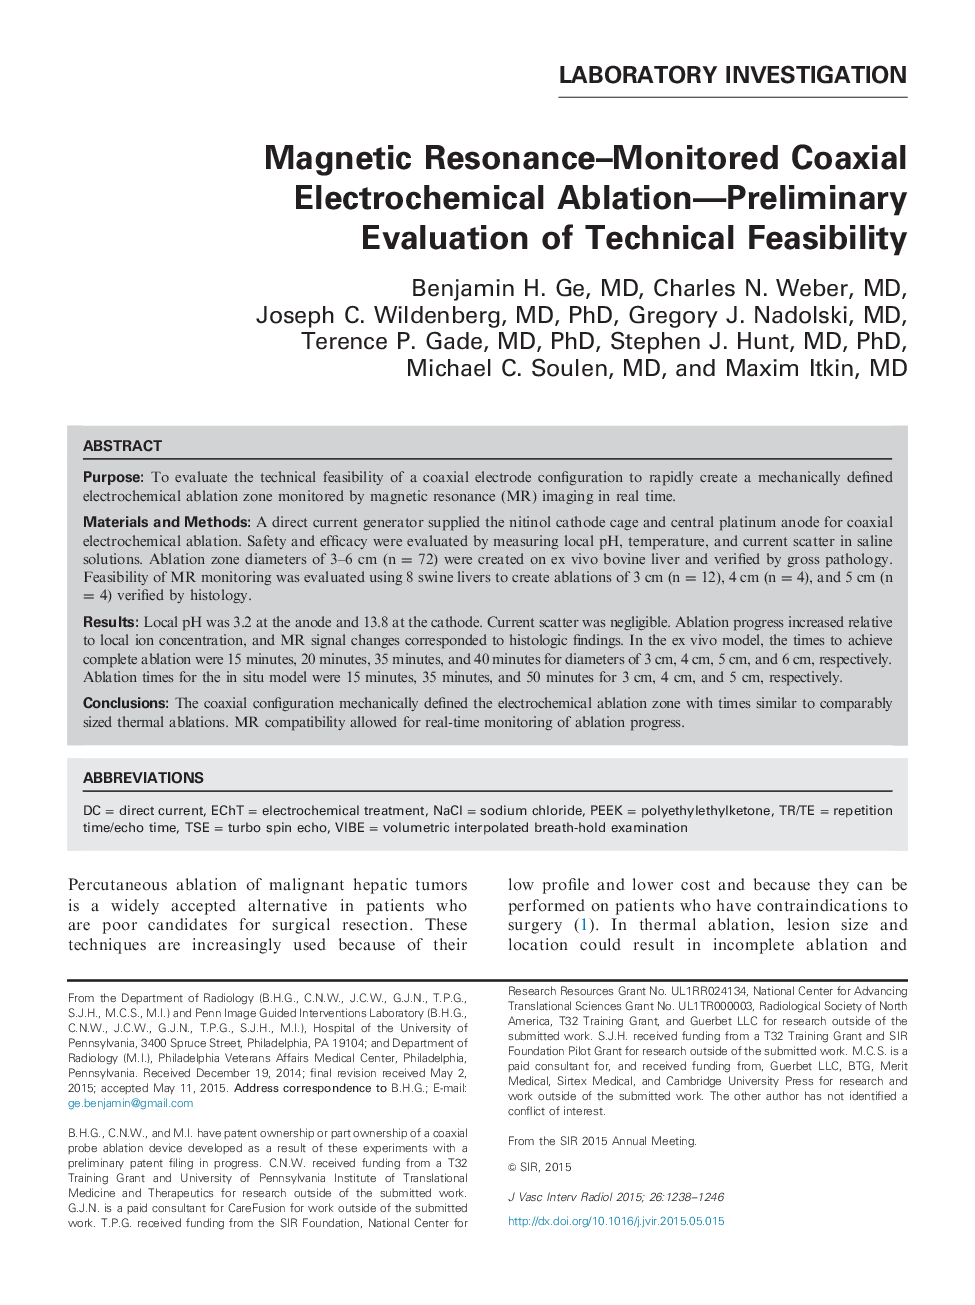 Magnetic Resonance-Monitored Coaxial Electrochemical Ablation-Preliminary Evaluation of Technical Feasibility